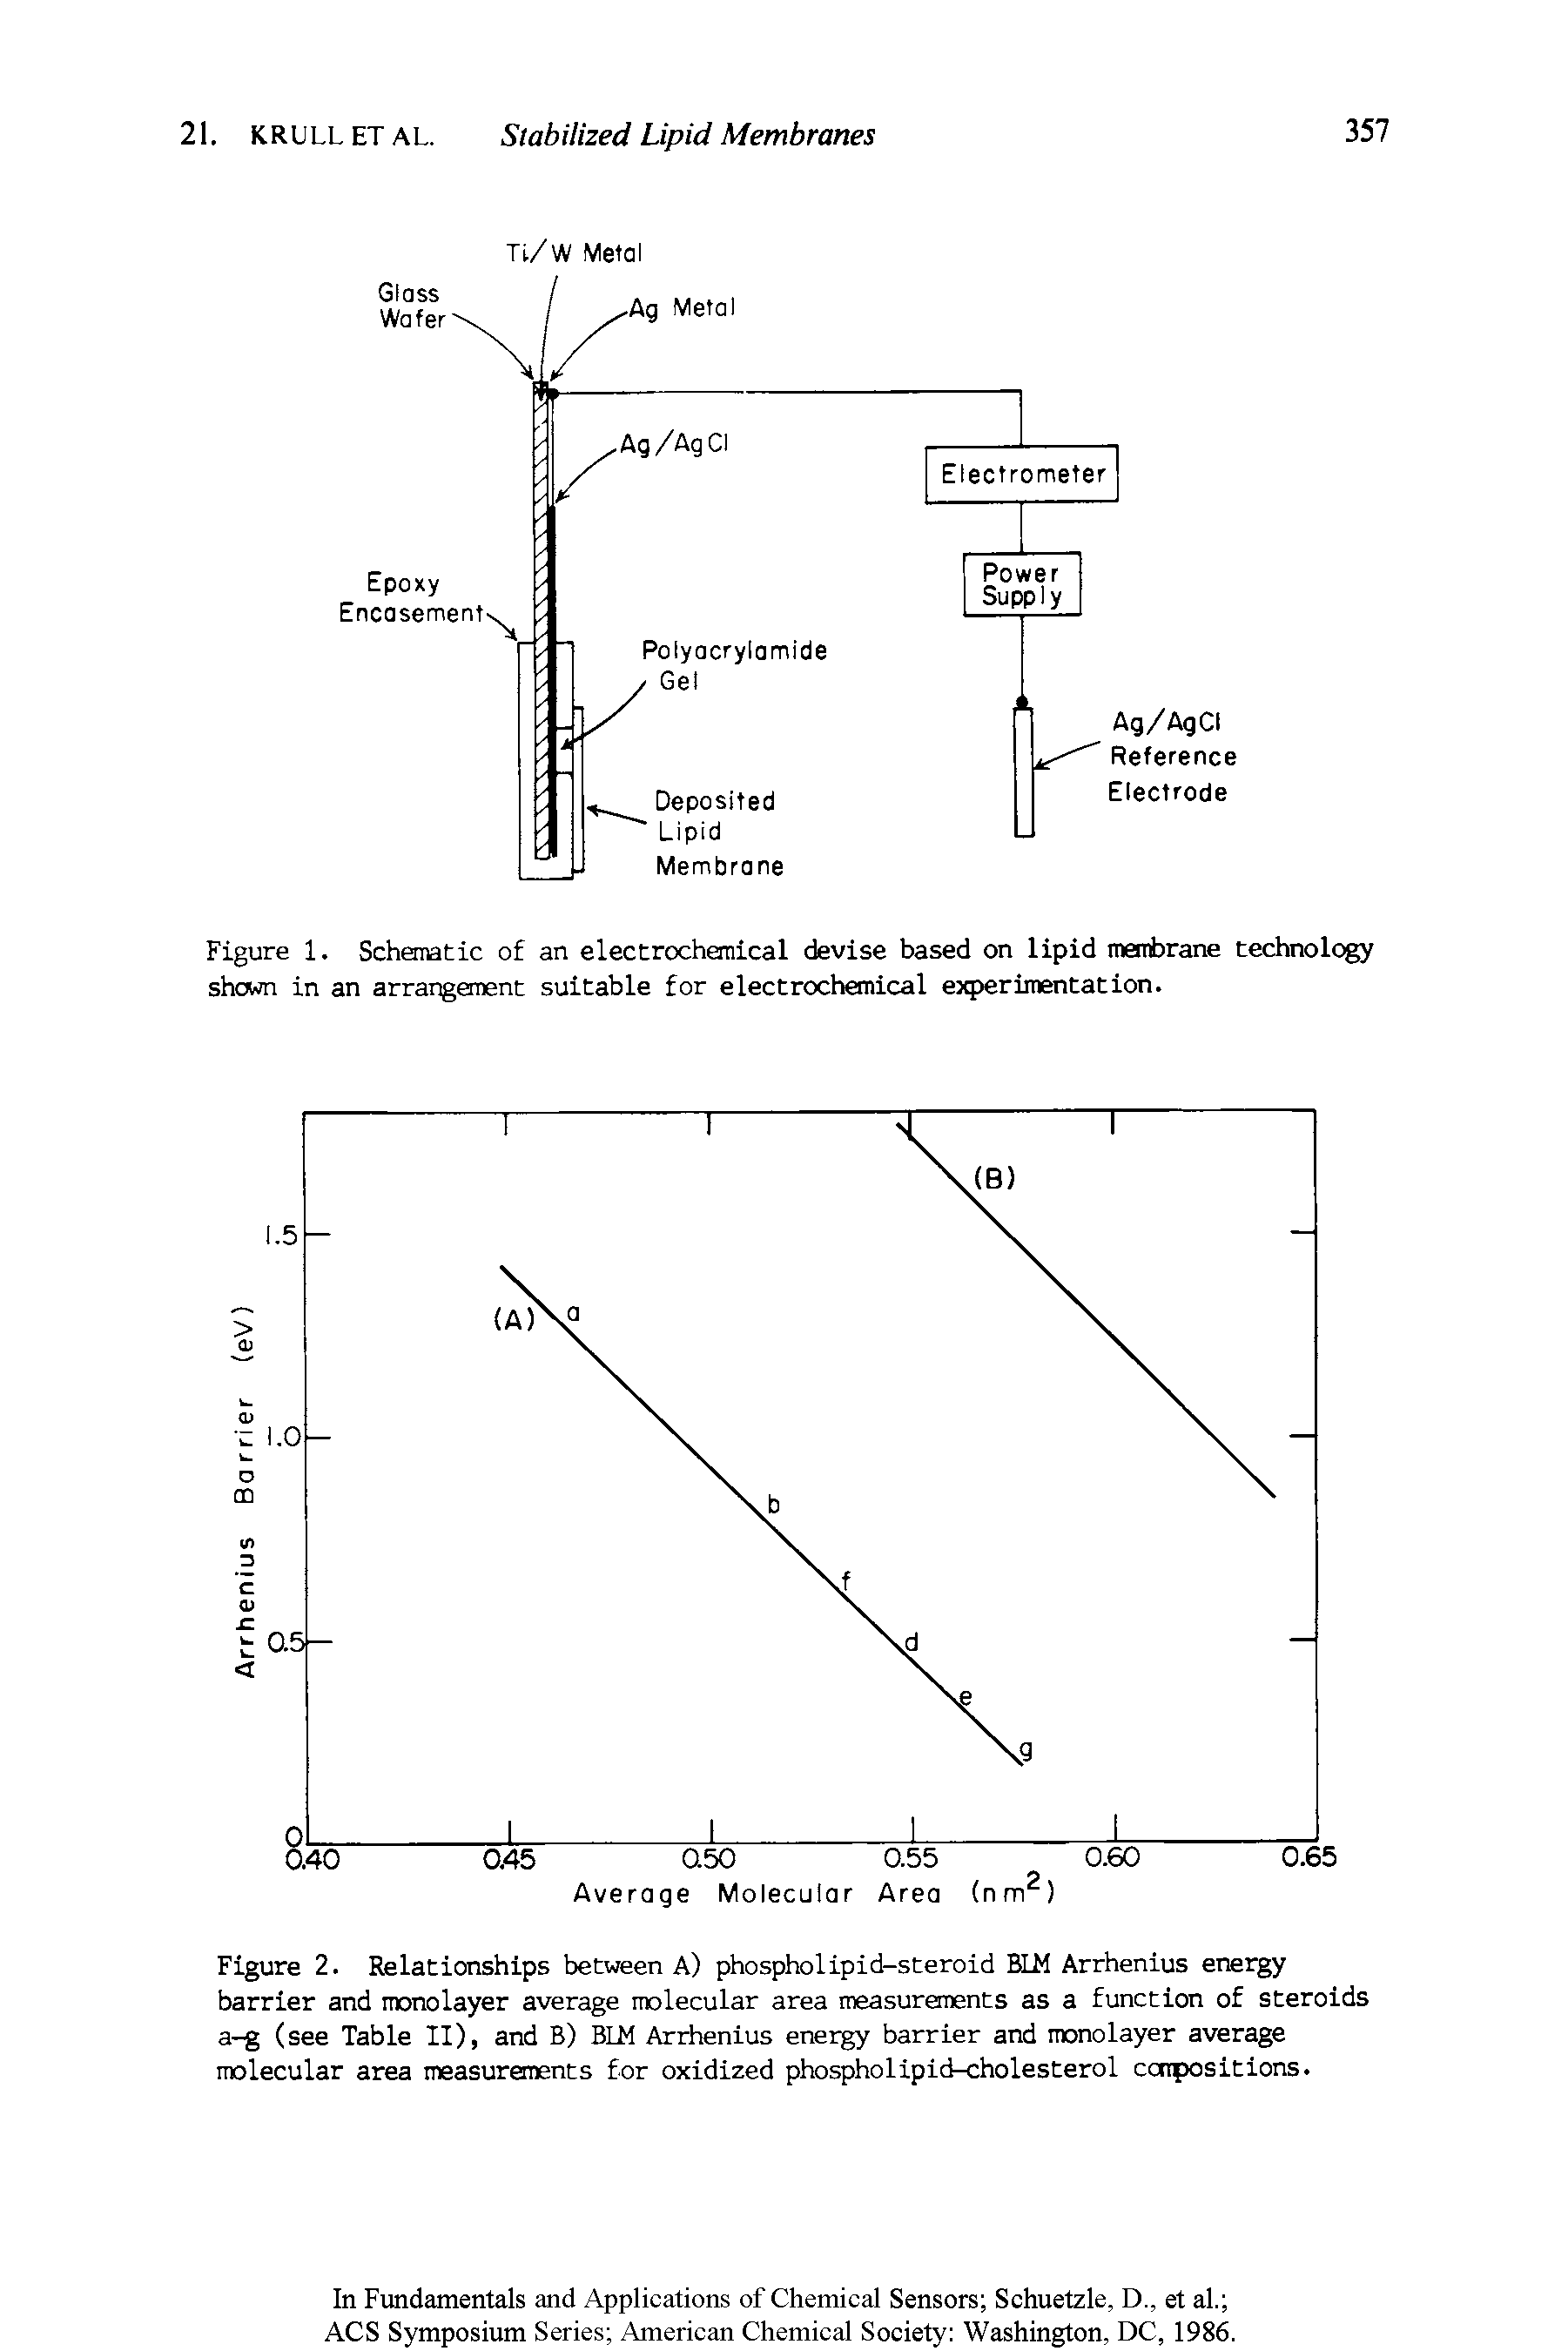 Figure 2. Relationships between A) phospholipid-steroid ELM Arrhenius energy barrier and monolayer average molecular area measurements as a function of steroids a-g (see Table II), and B) BLM Arrhenius energy barrier and monolayer average molecular area measurements for oxidized phospholipid-cholesterol compositions.